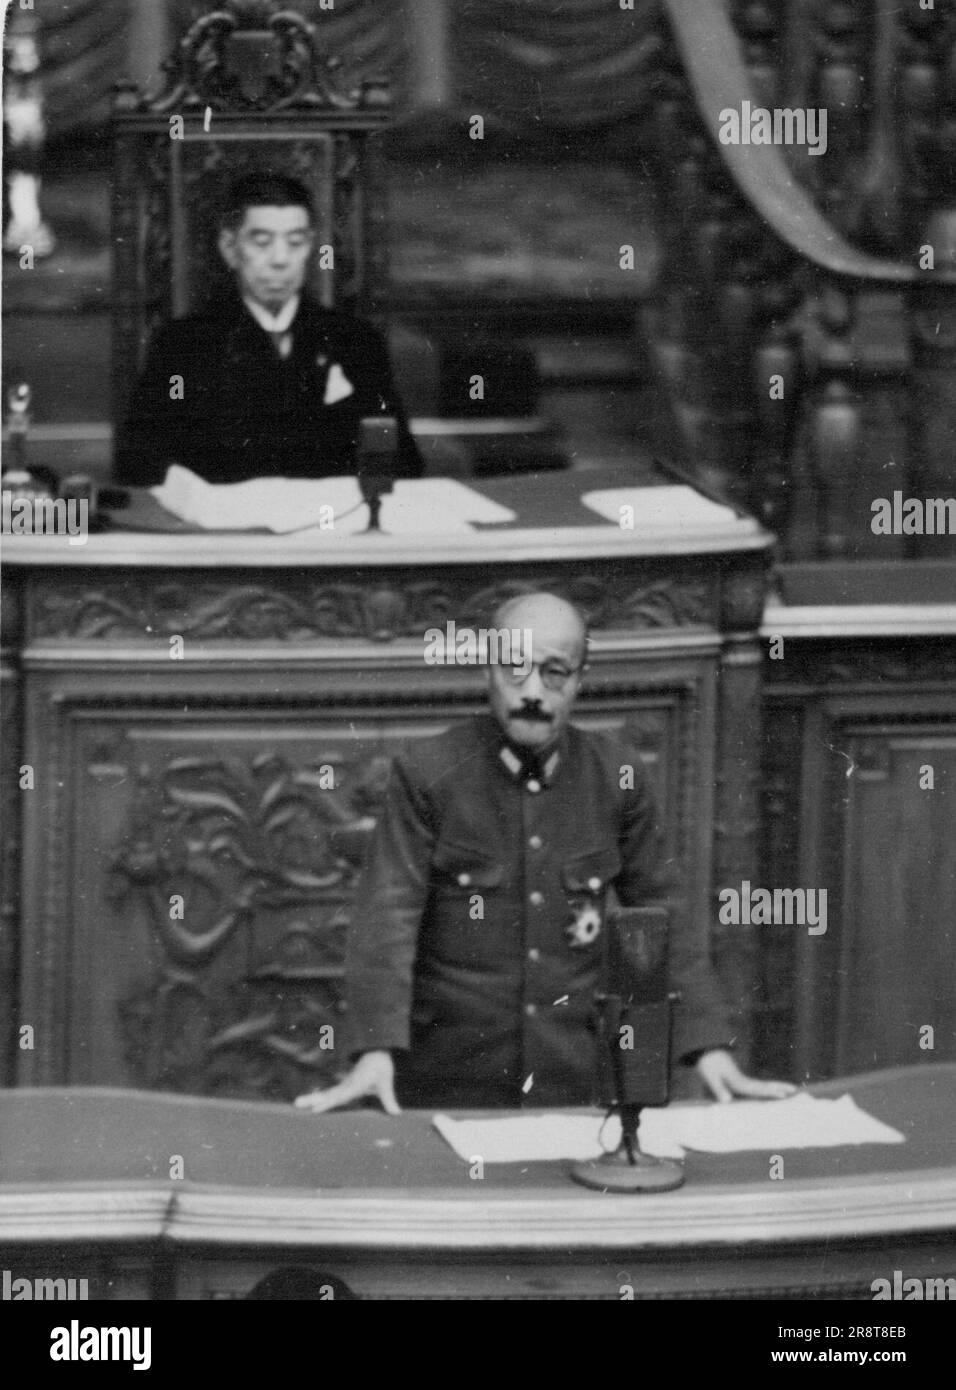 Premier Gives State Policies ... Premier General Hideki Tojo was taken as delivering the much-awaited address before the House of Peers, assembled in full session, this morning. November 17, 1941. (Photo by The Domei News Photos Service). Stock Photo